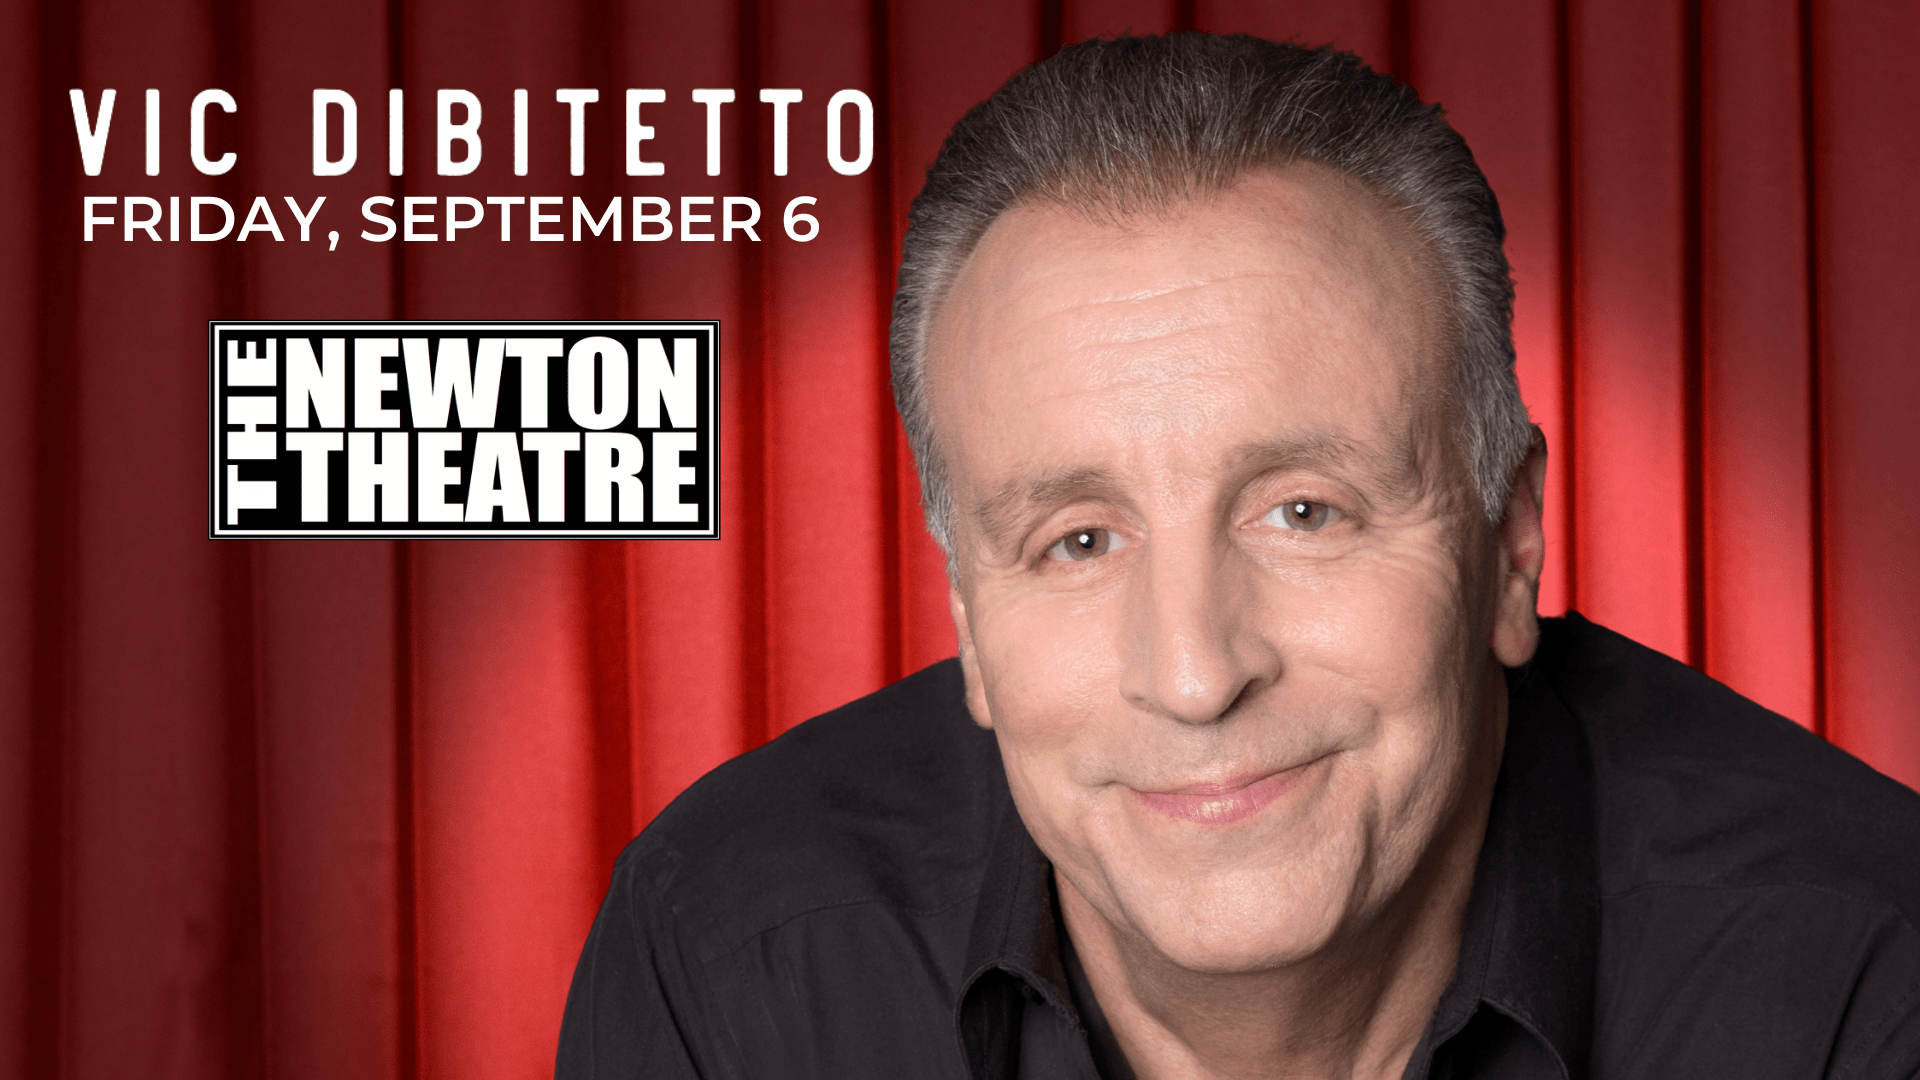 Vic Dibitetto comes to The Newton Theatre on Friday, September 6th.